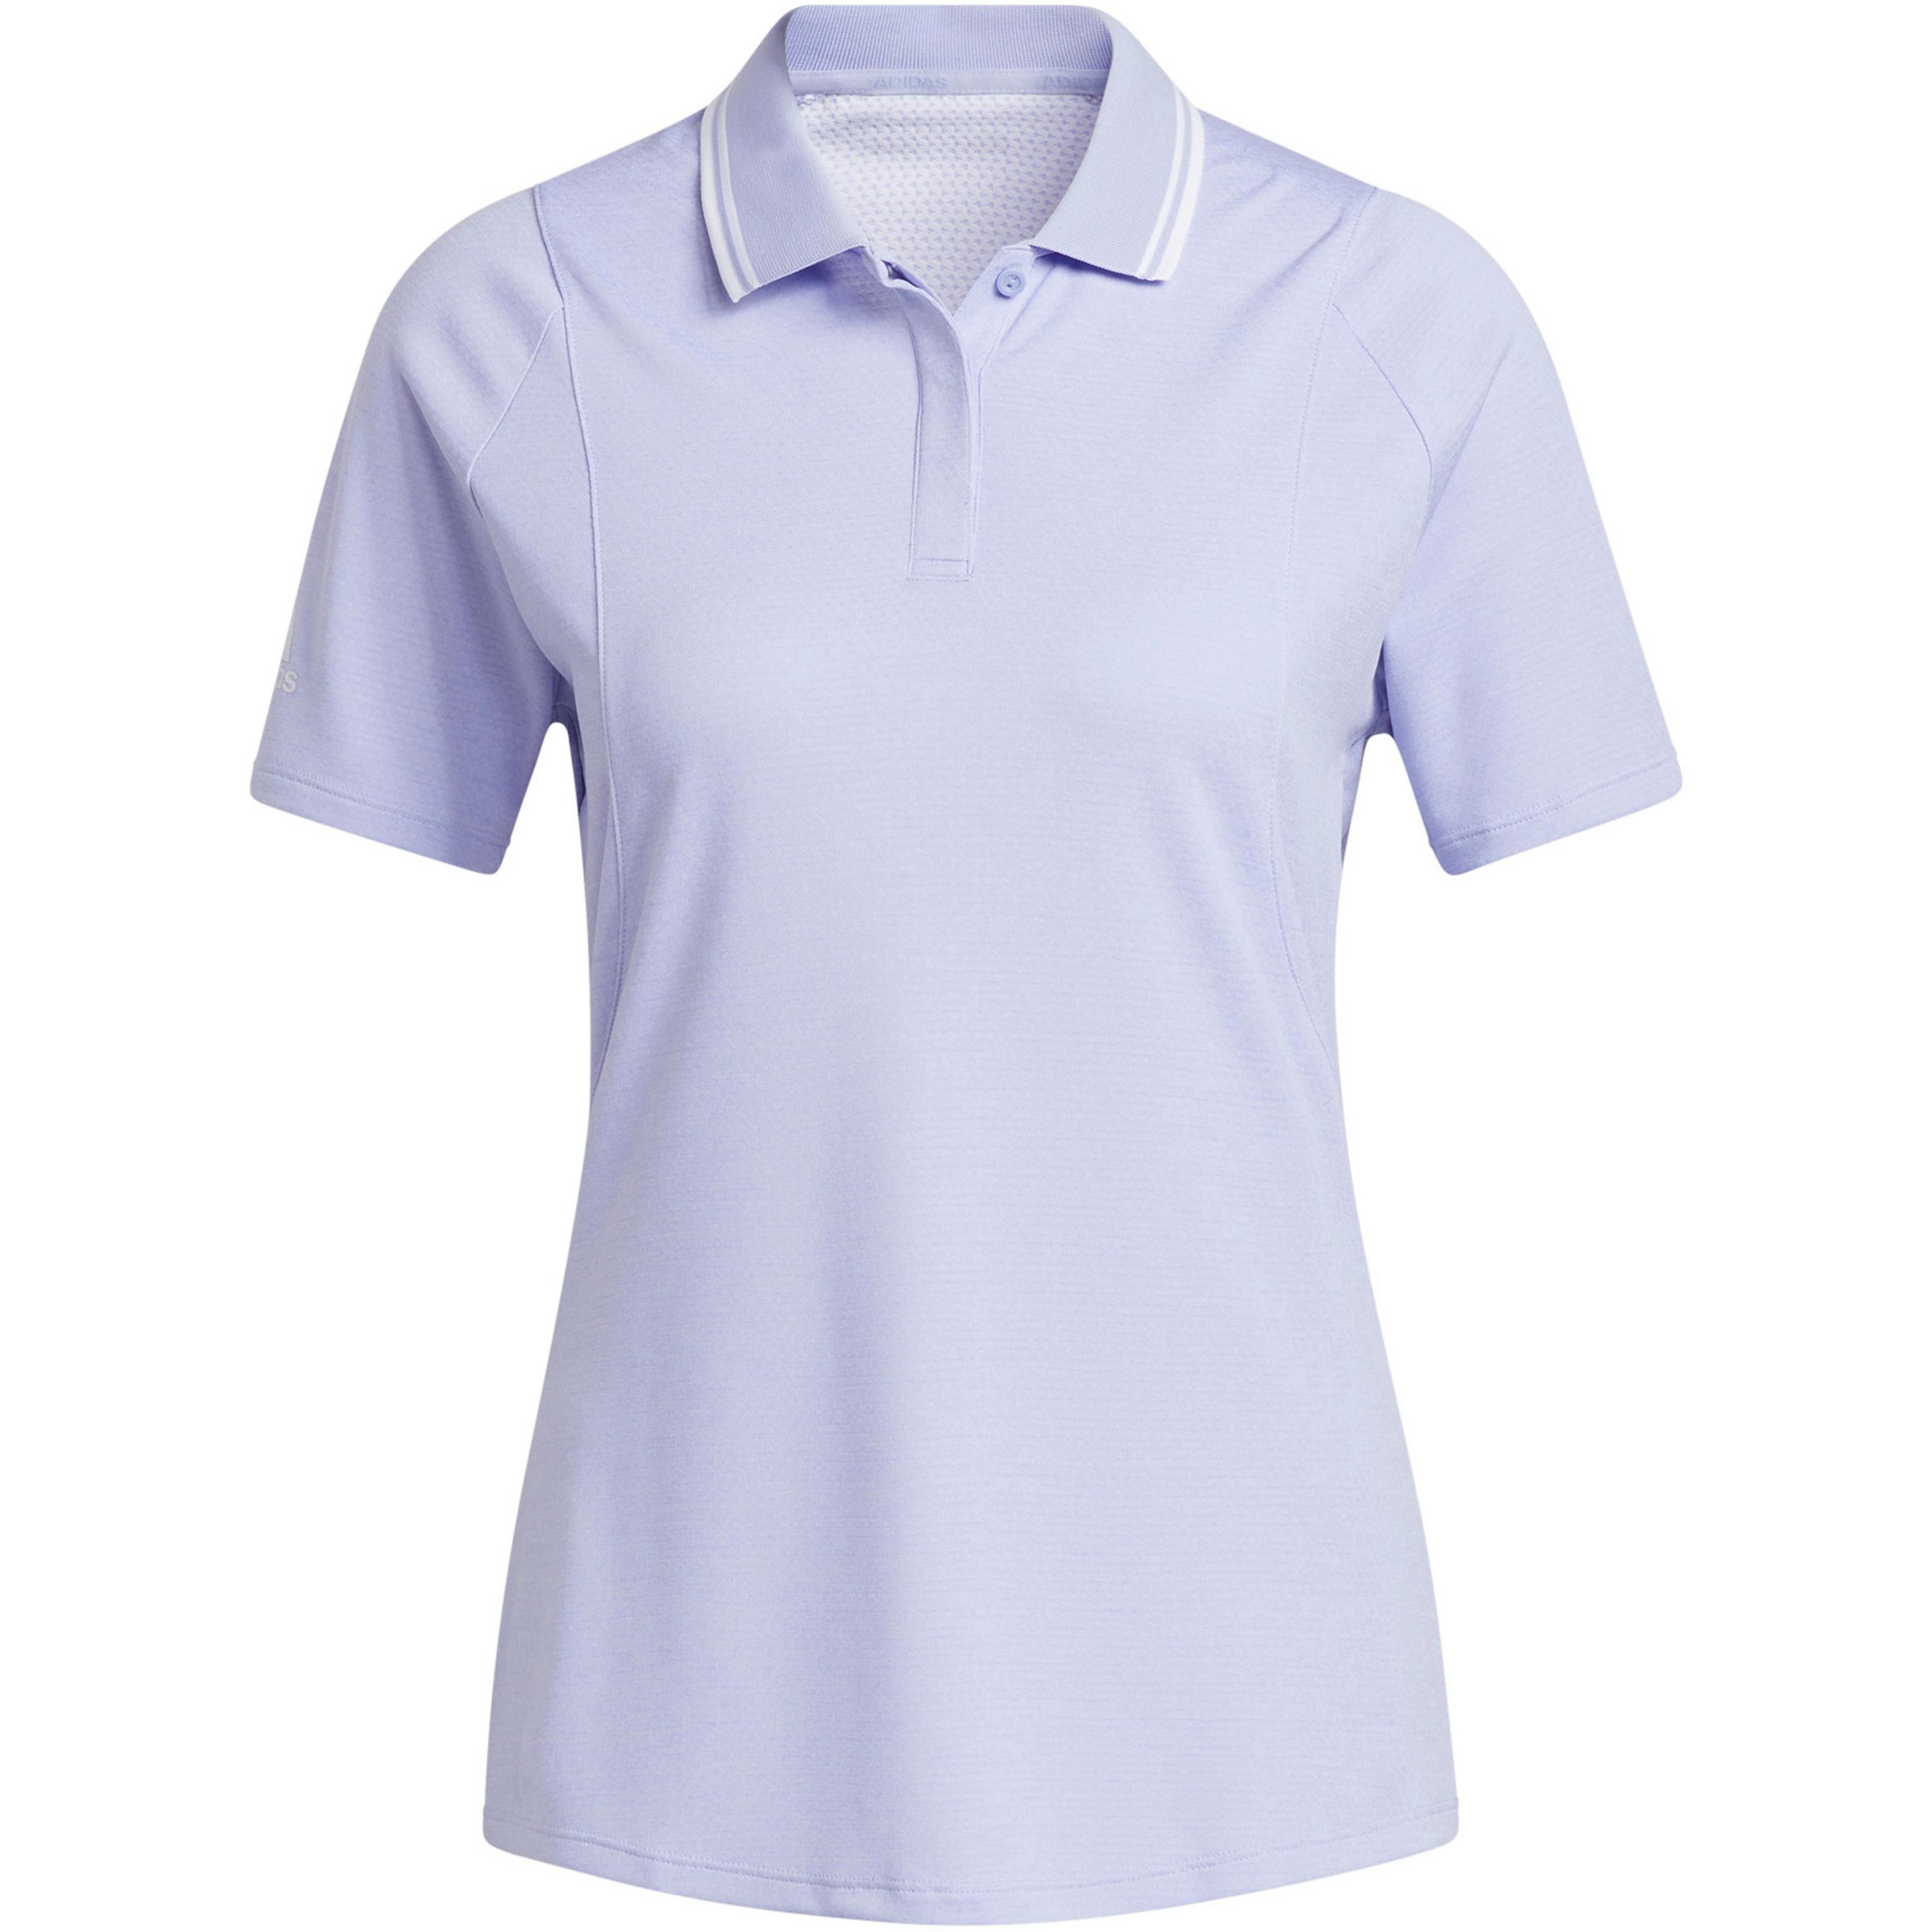 ADIDAS PERFORMANCE Funktionsshirt in Lavendel 